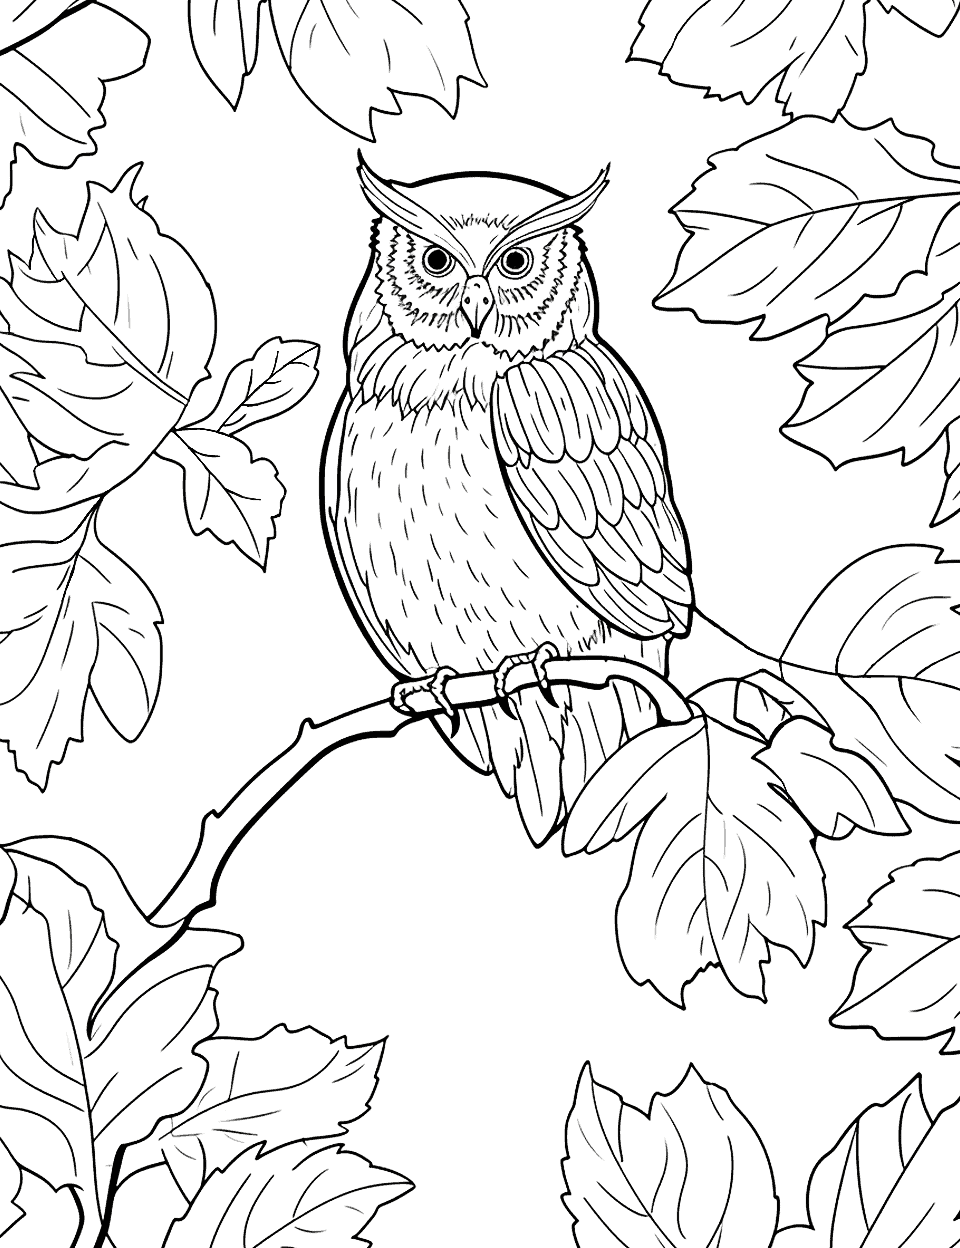 Owl Adventure Fall Coloring Page - A complex design of an owl exploring the fall season, suitable for older kids who want a challenge.